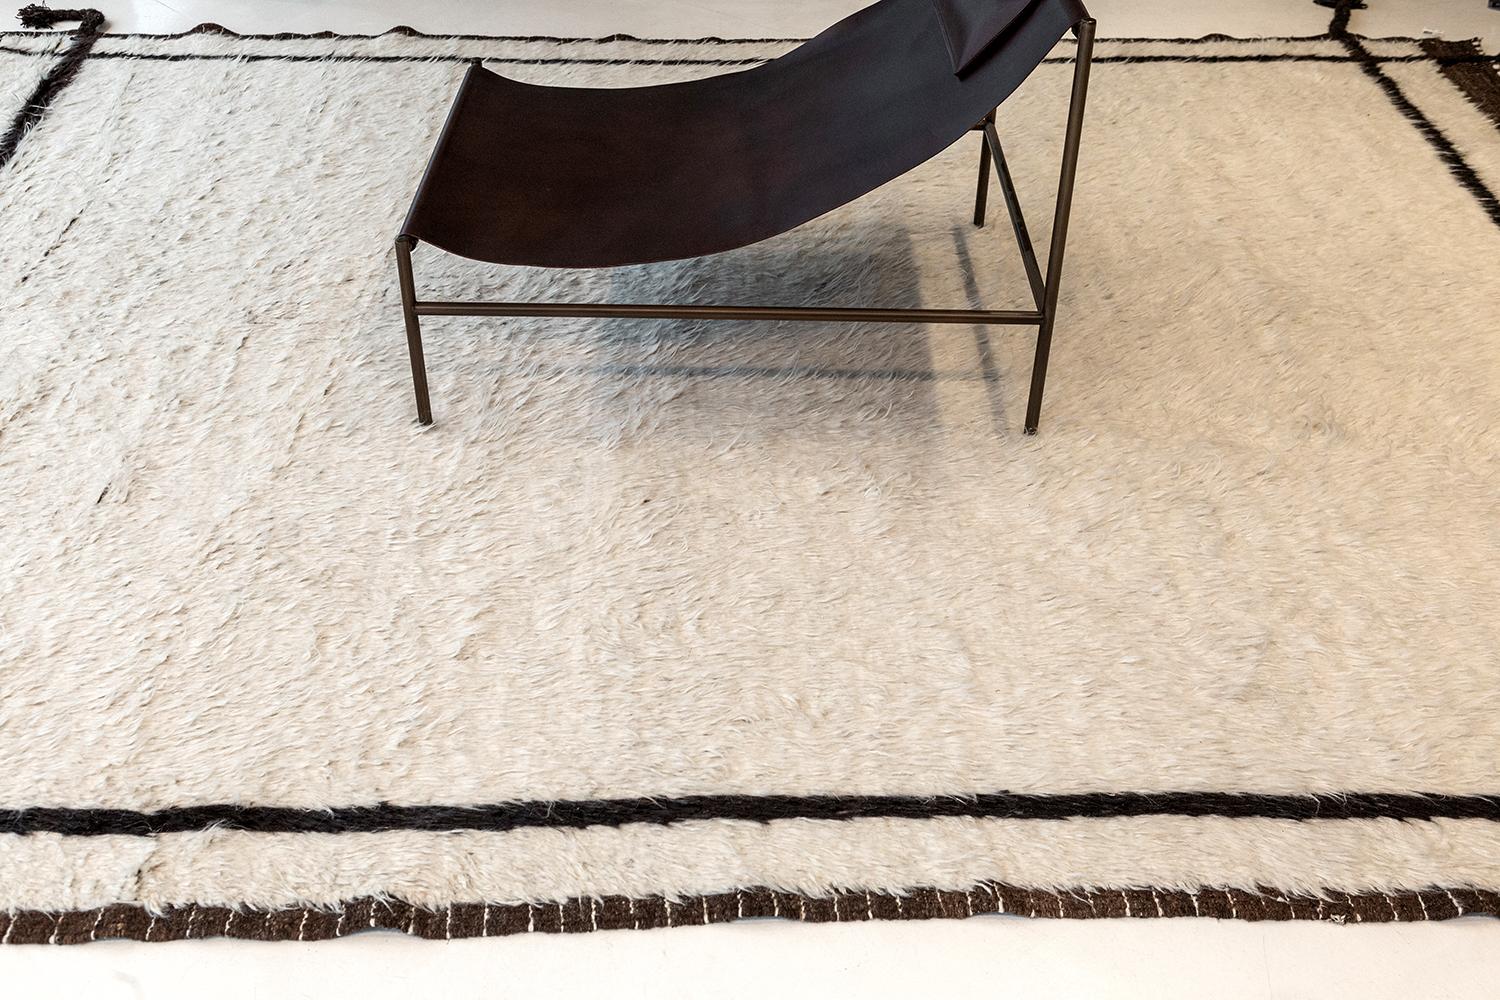 It may simple as it looks like, but it will make your space more elegant with this Tangier rug from our Atlas Collection. Linear borders with a solid brown top and bottom edges in a field of pearl make the rug more classic and bring your home into a